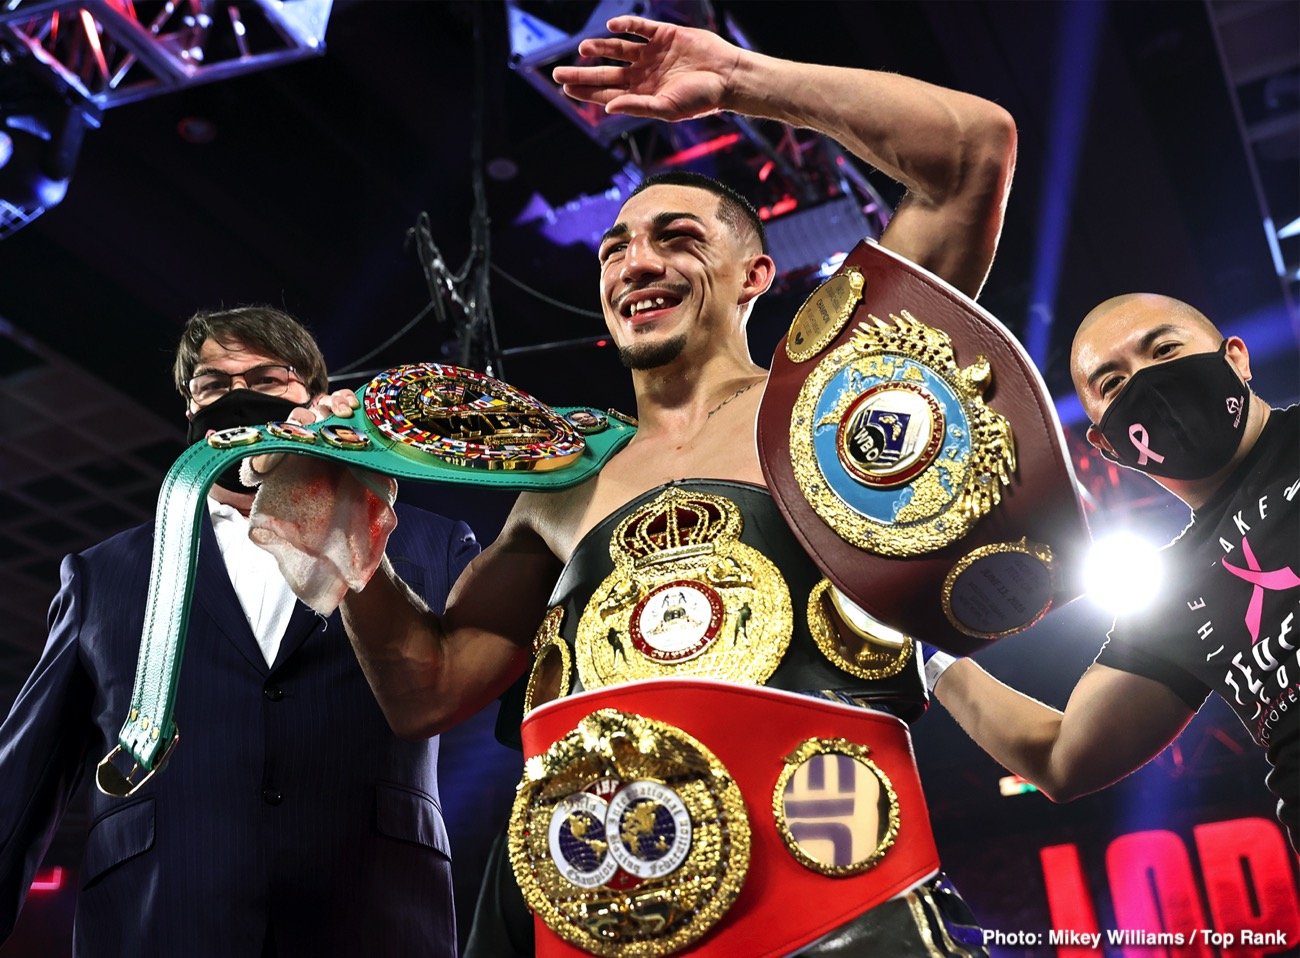 Teofimo Lopez still needs to beat Devin Haney to become undisputed - says Josh Taylor